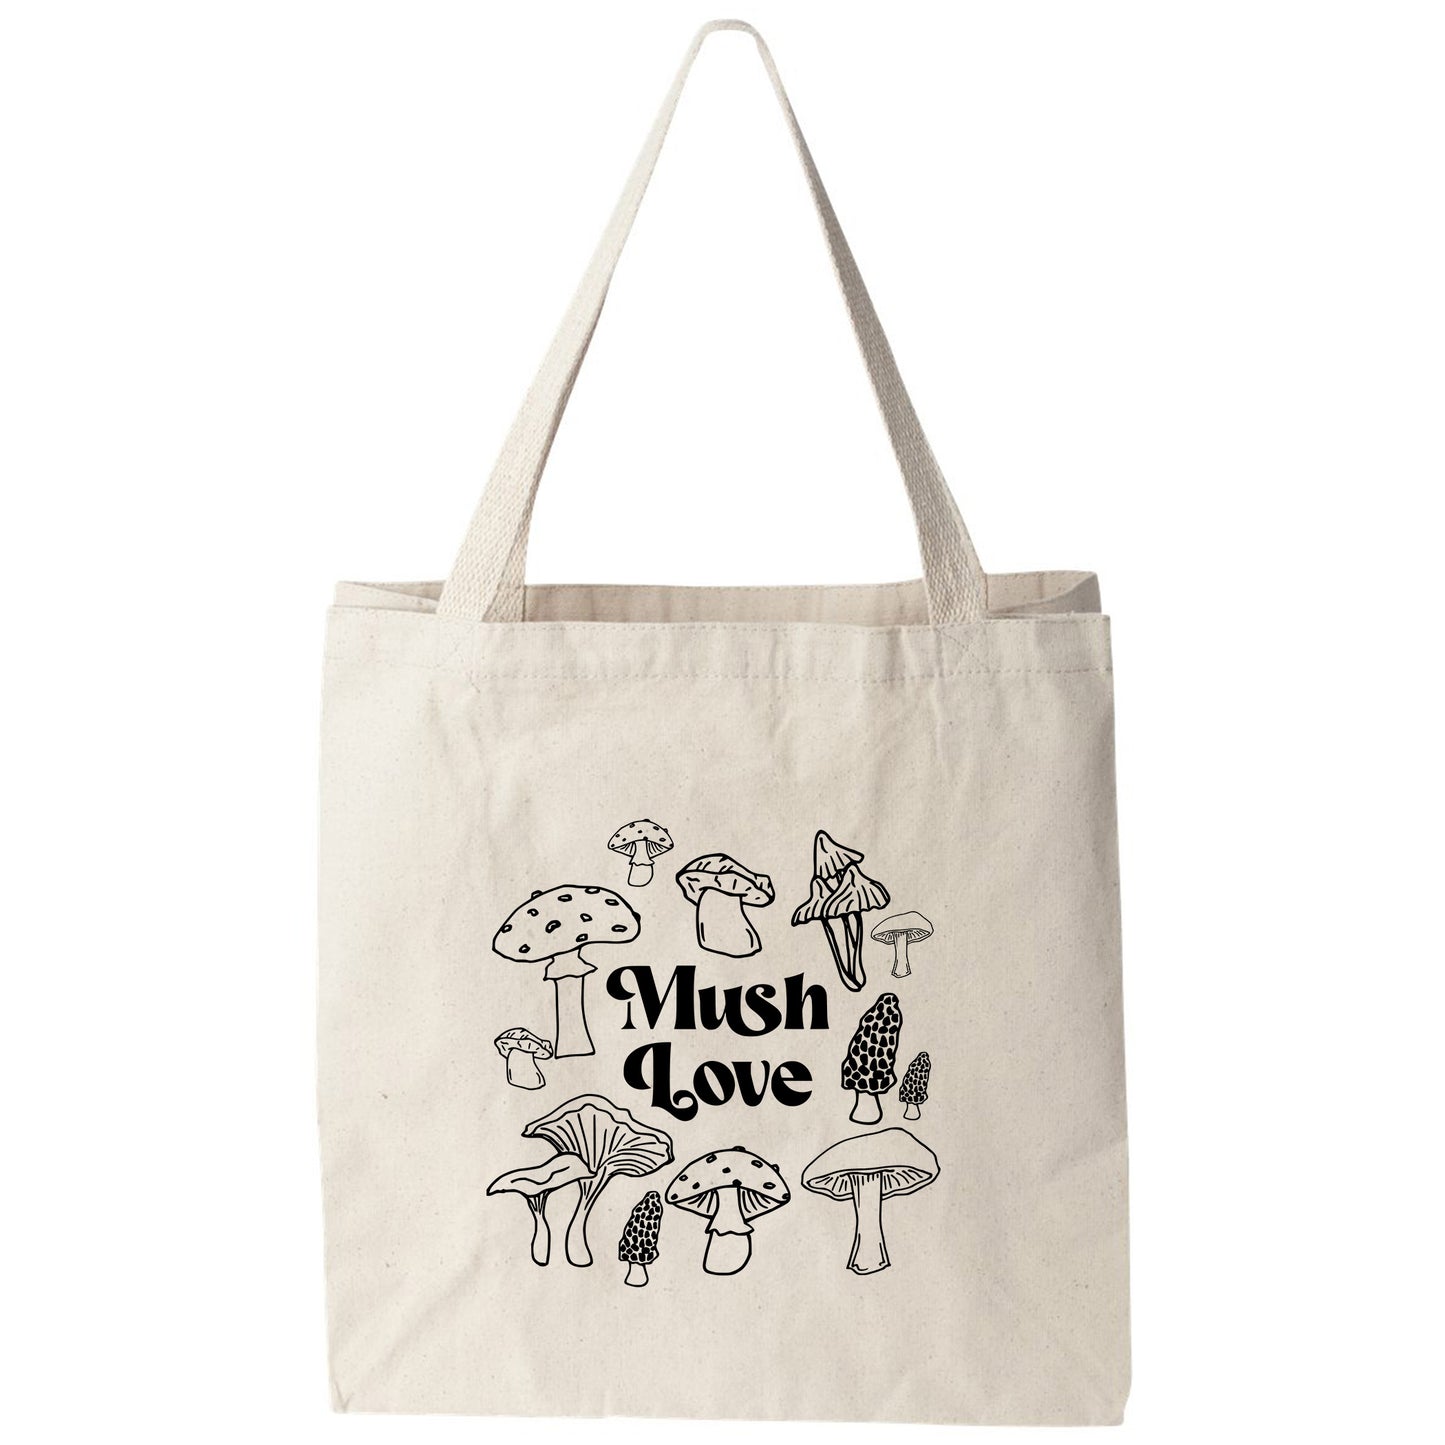 a tote bag with mushrooms printed on it